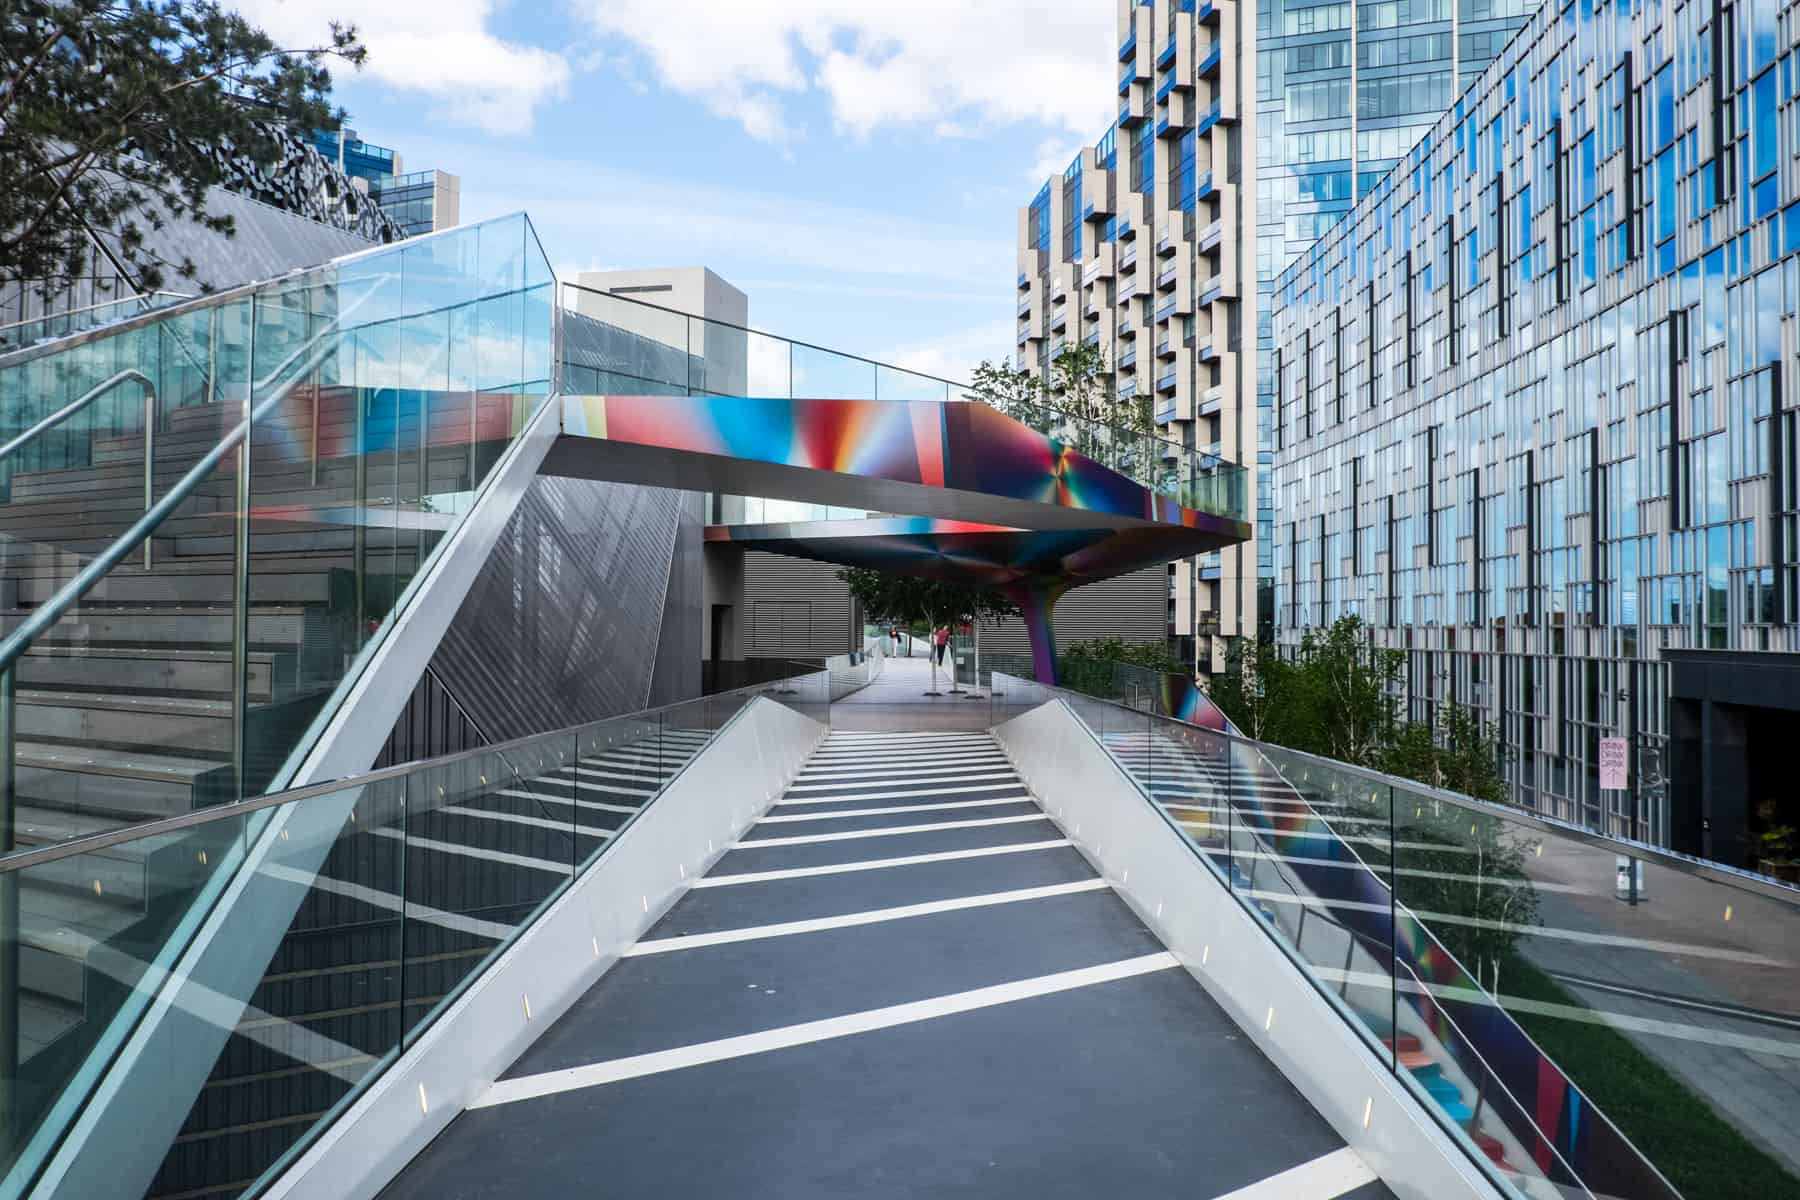 An art installation pathway in Greenwich Peninsula with rainbow balconies and monochrome walkways, next to modern glass buildings. 